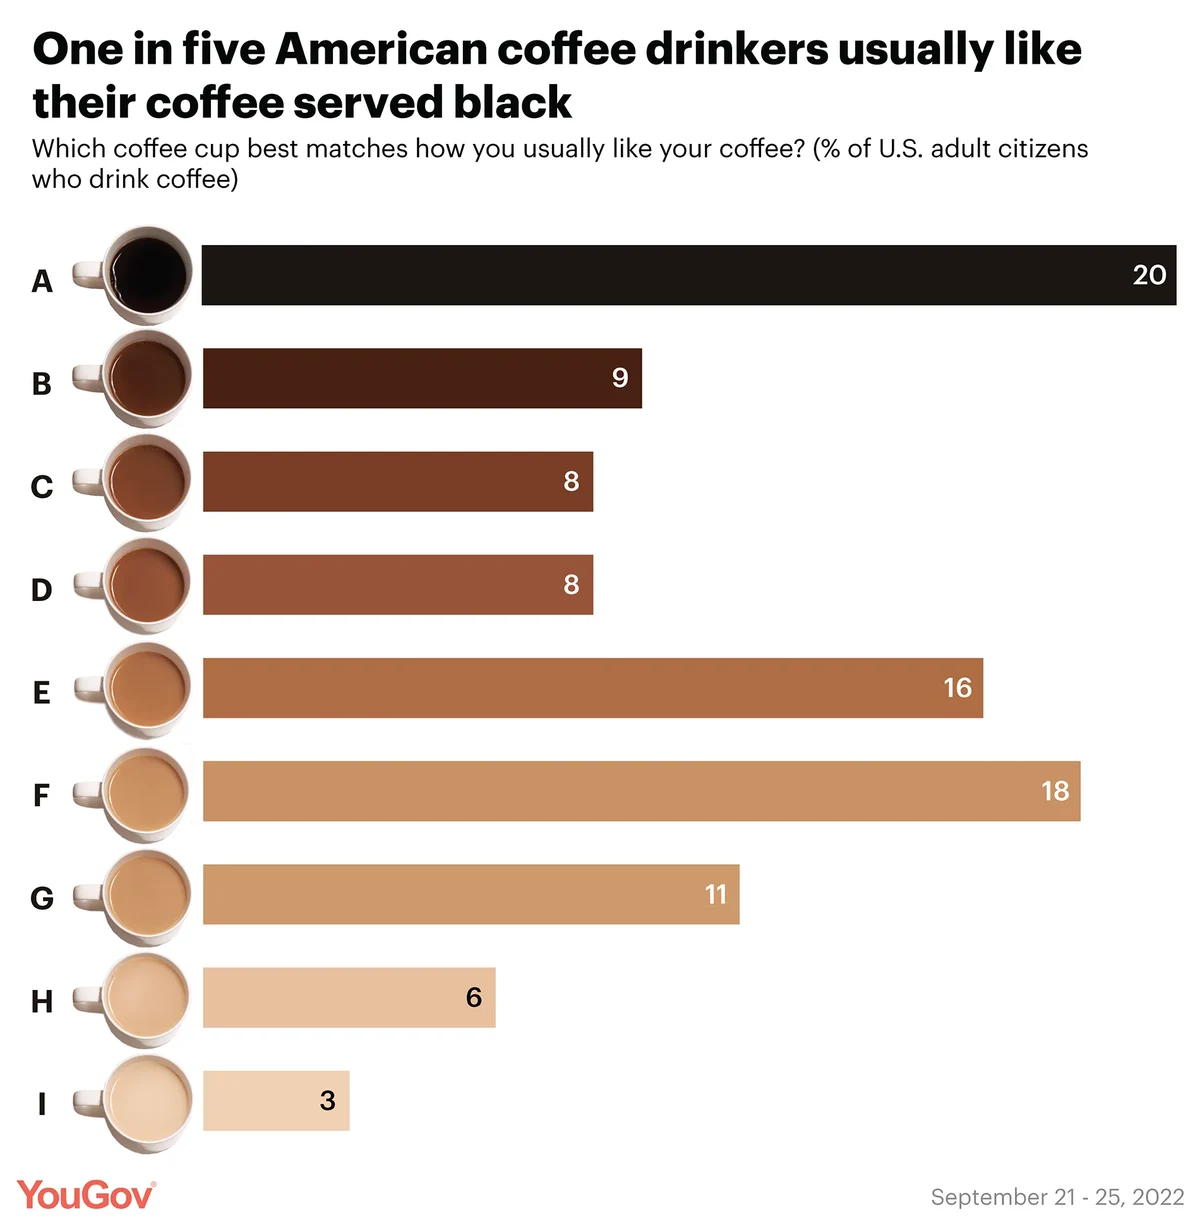 How do people in the U.S. take their coffee?